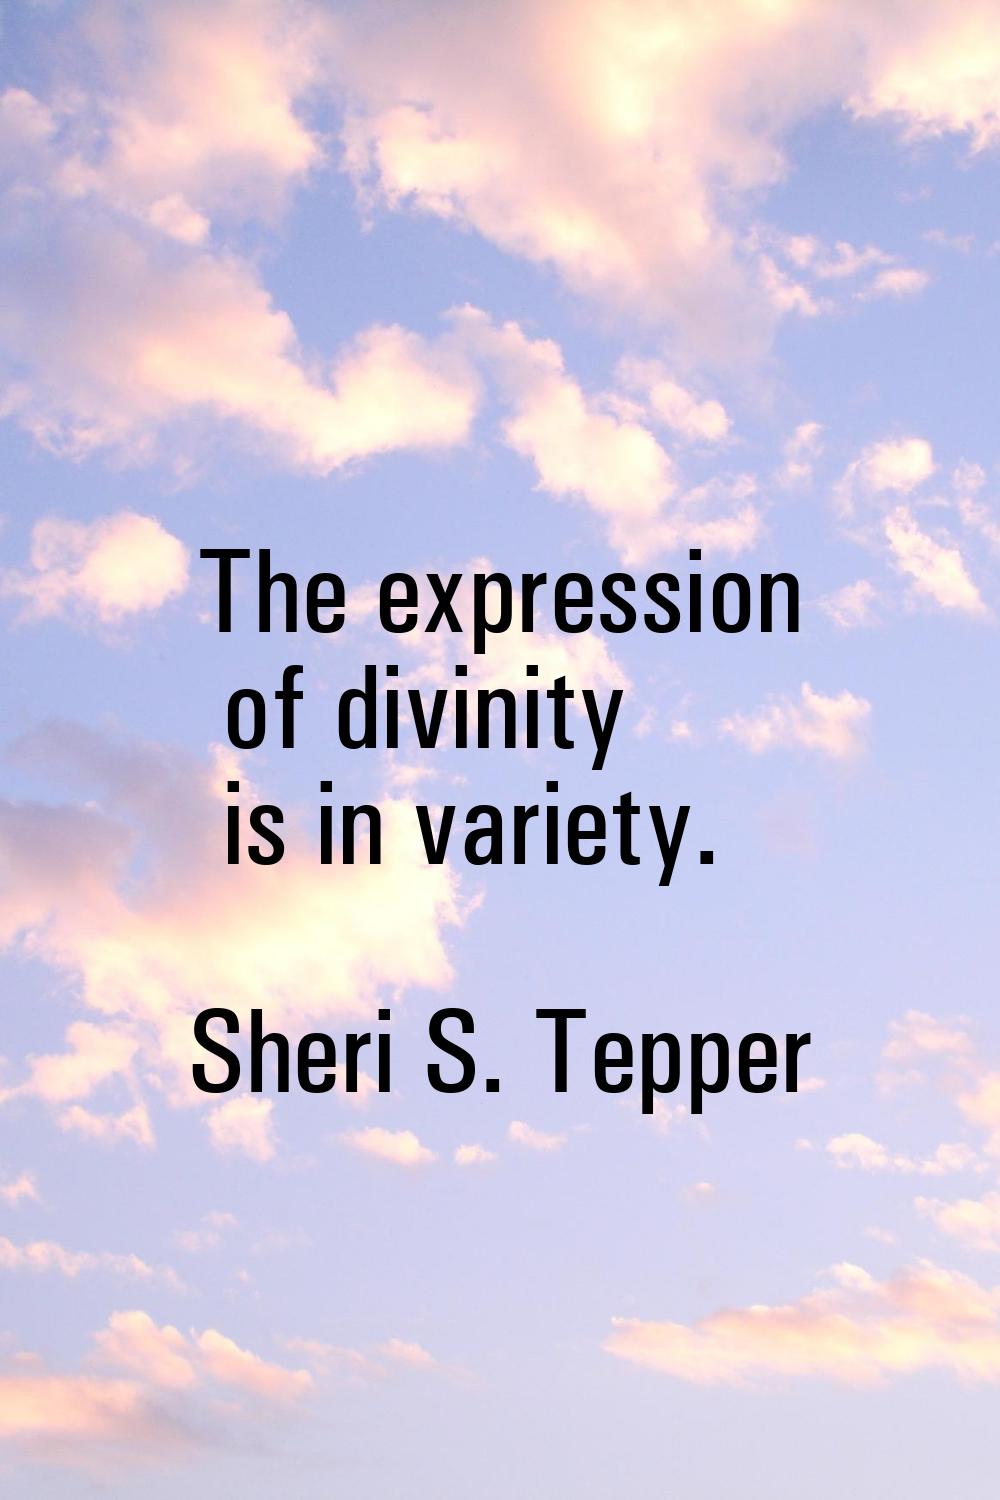 The expression of divinity is in variety.